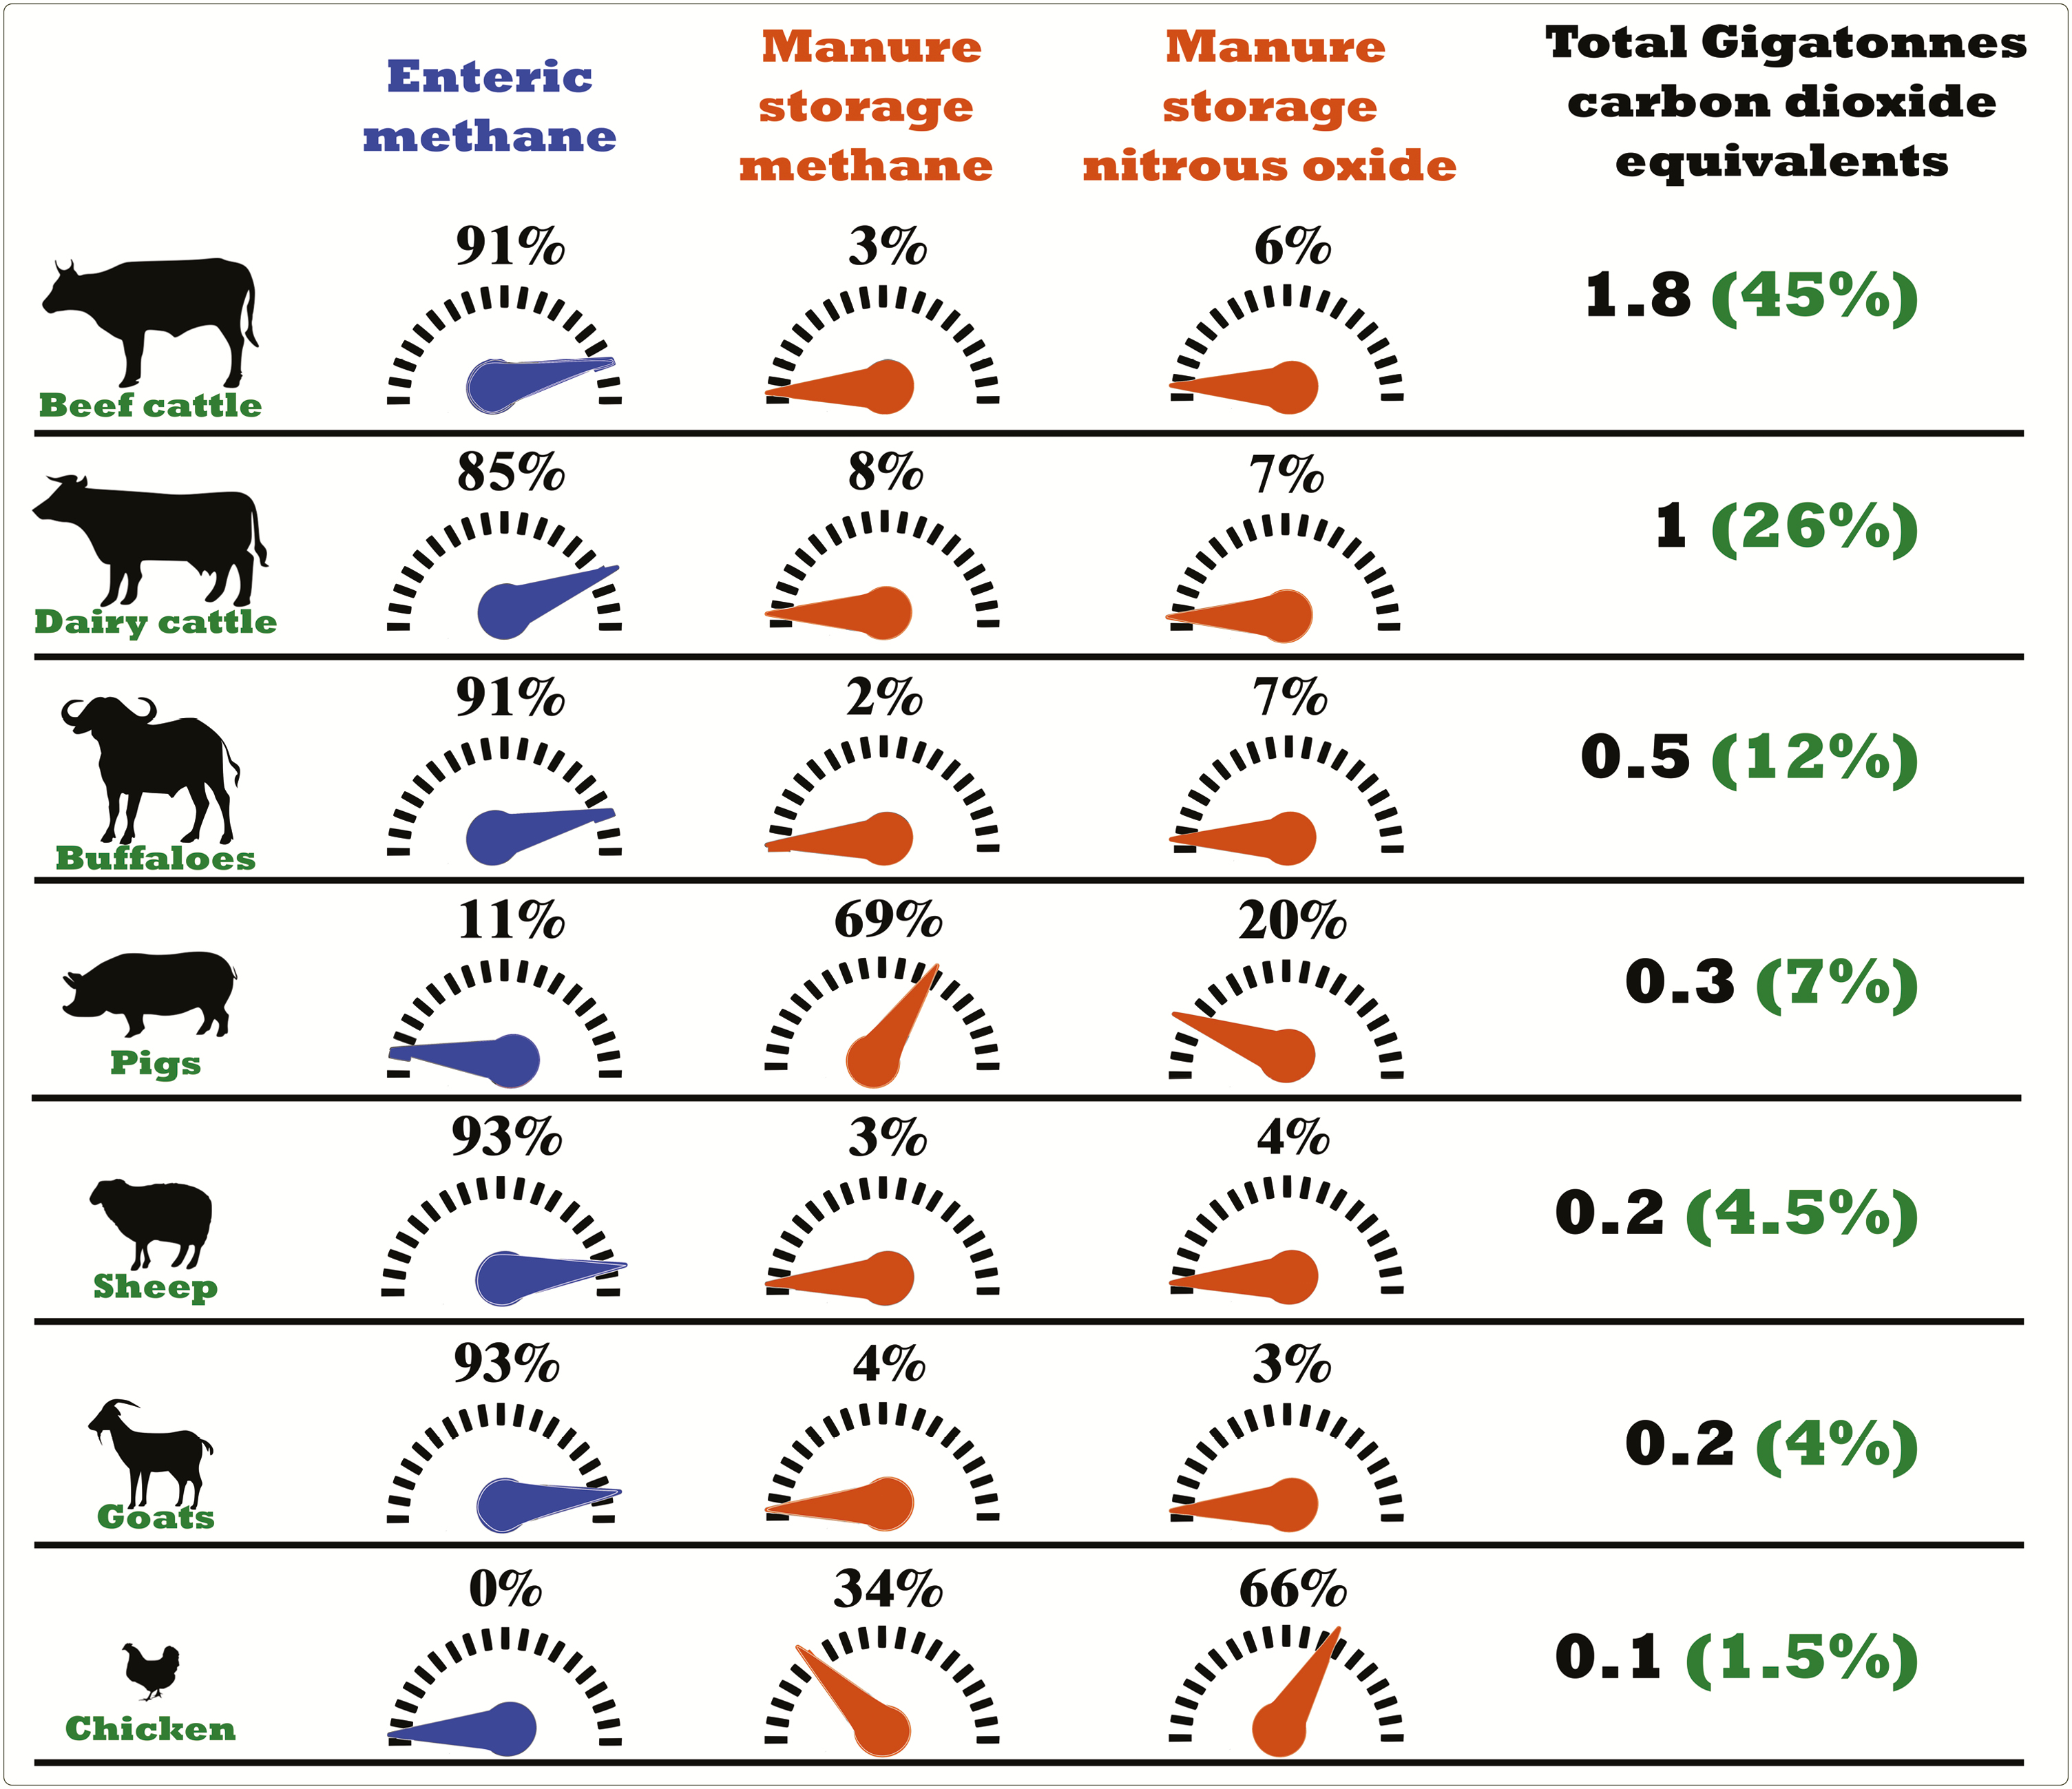 GHG incidence of enteric fermentation/manure storage by animal type, expressed as Gtons of CO2 equivalent. See text alternative below